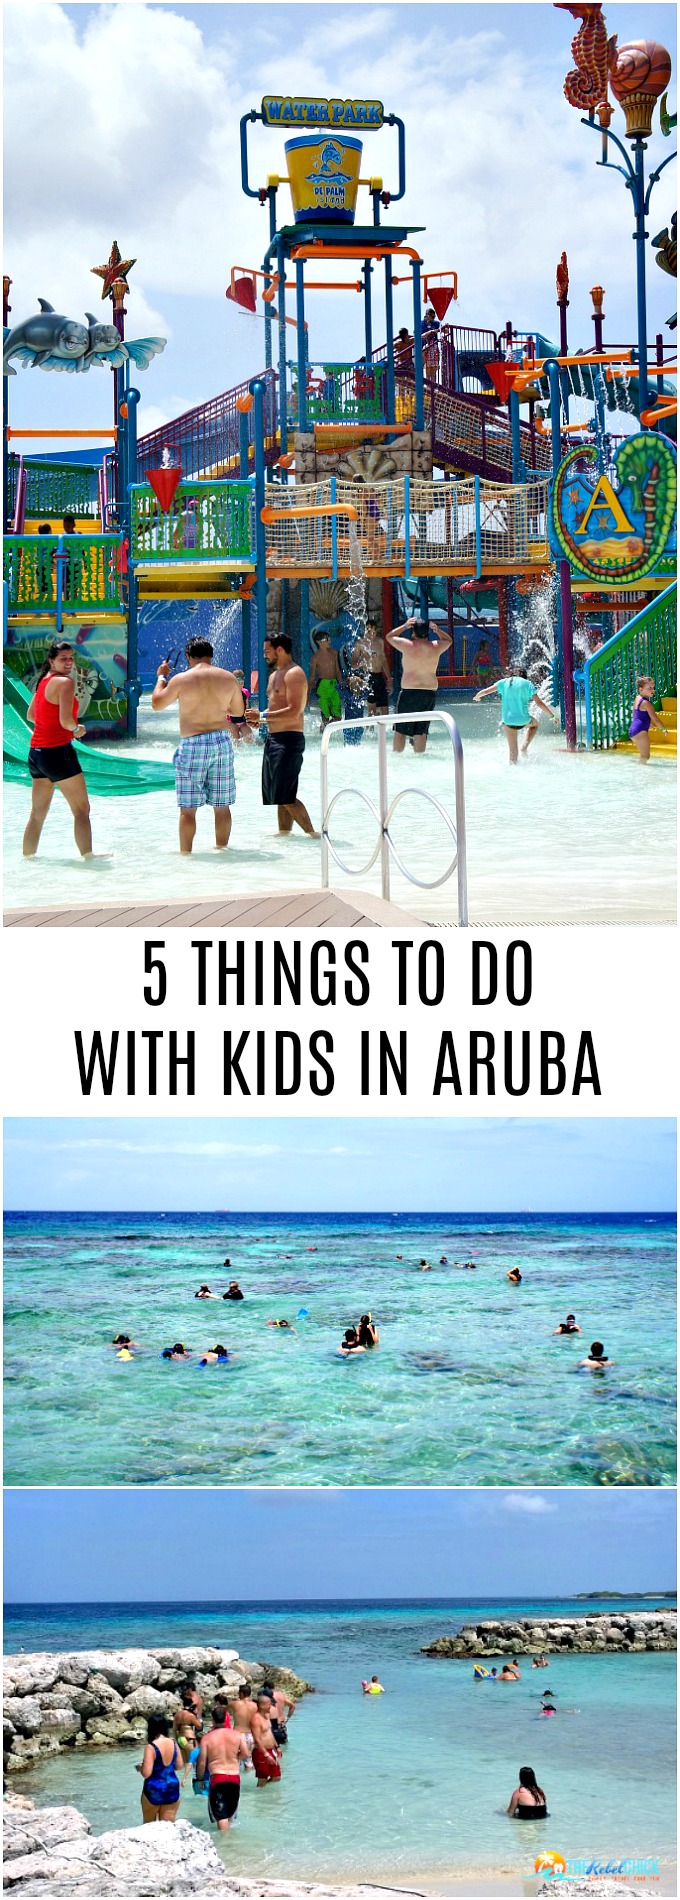 5 THINGS TO DO WITH KIDS IN ARUBA